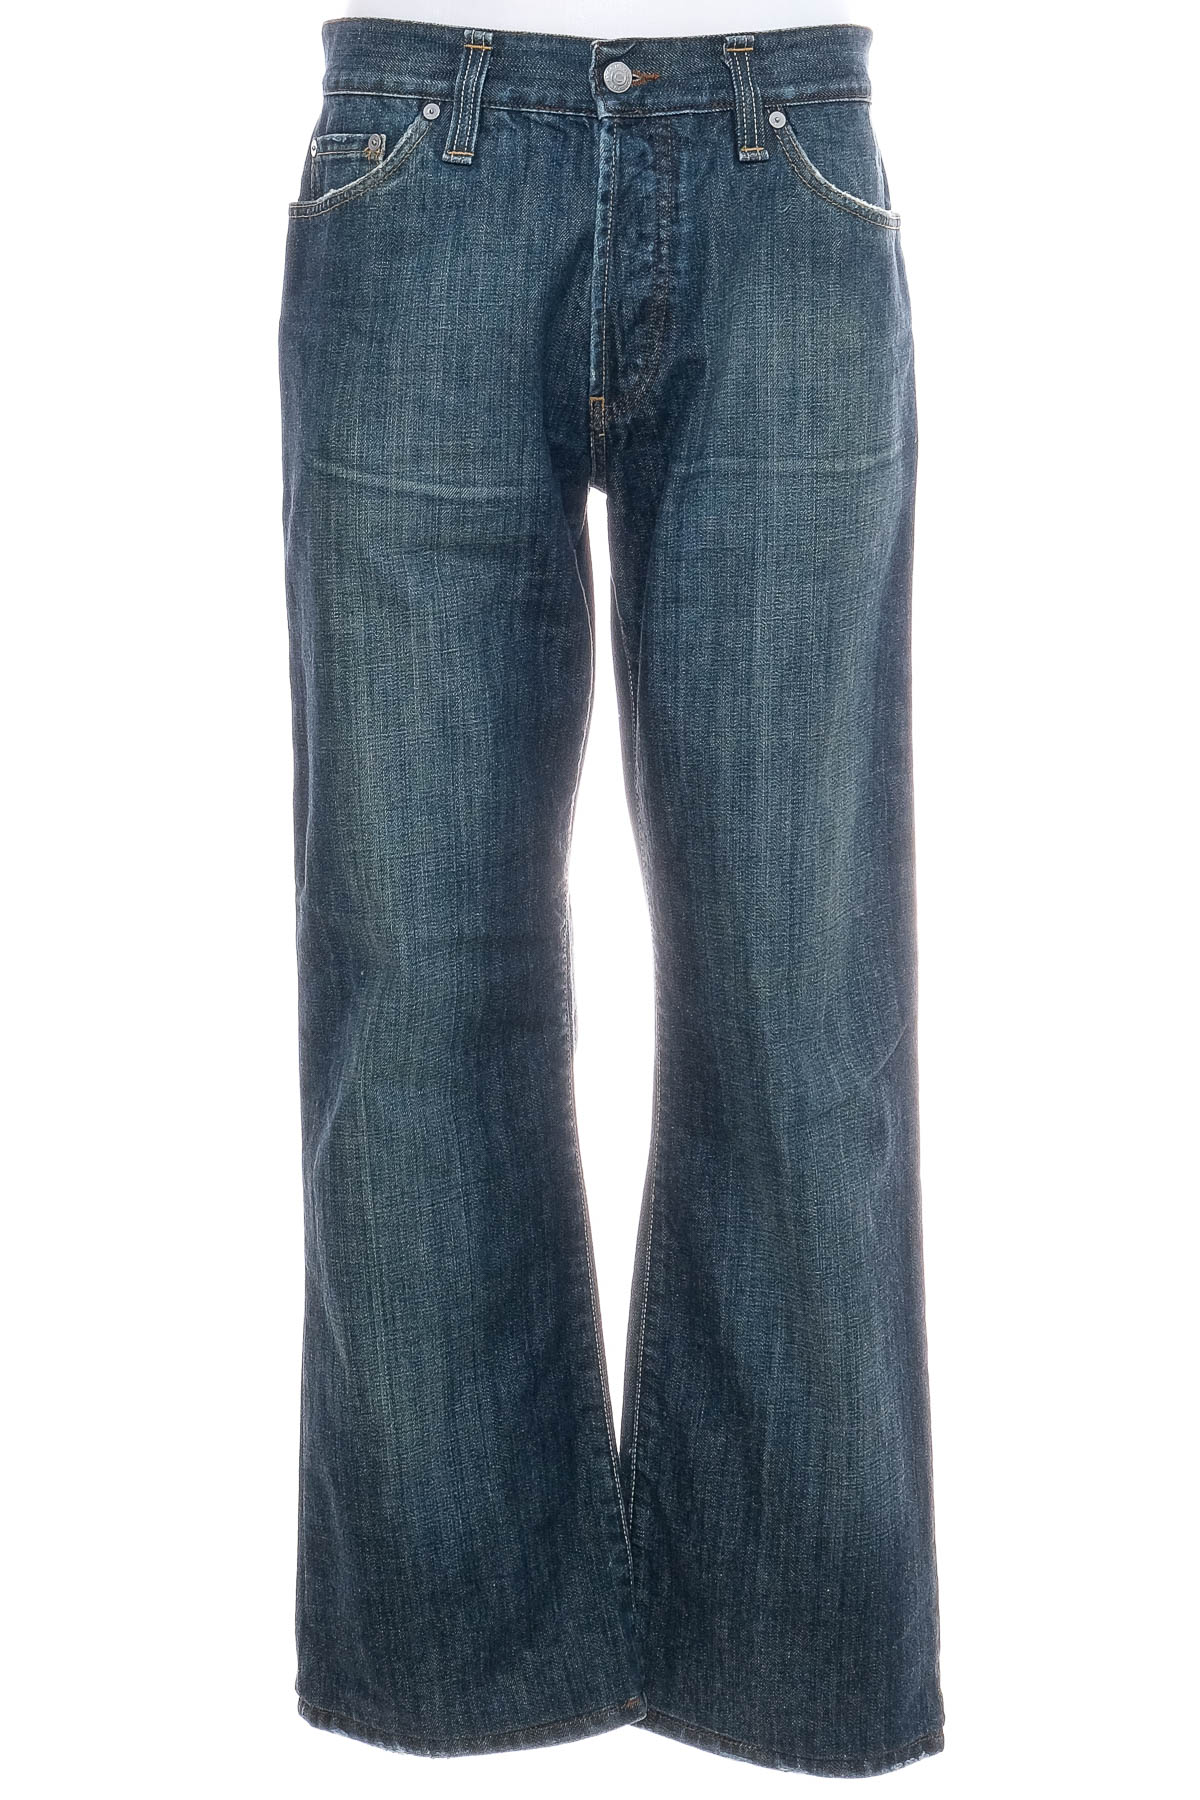 Men's jeans - CAMPUS by Marc O' Polo - 0